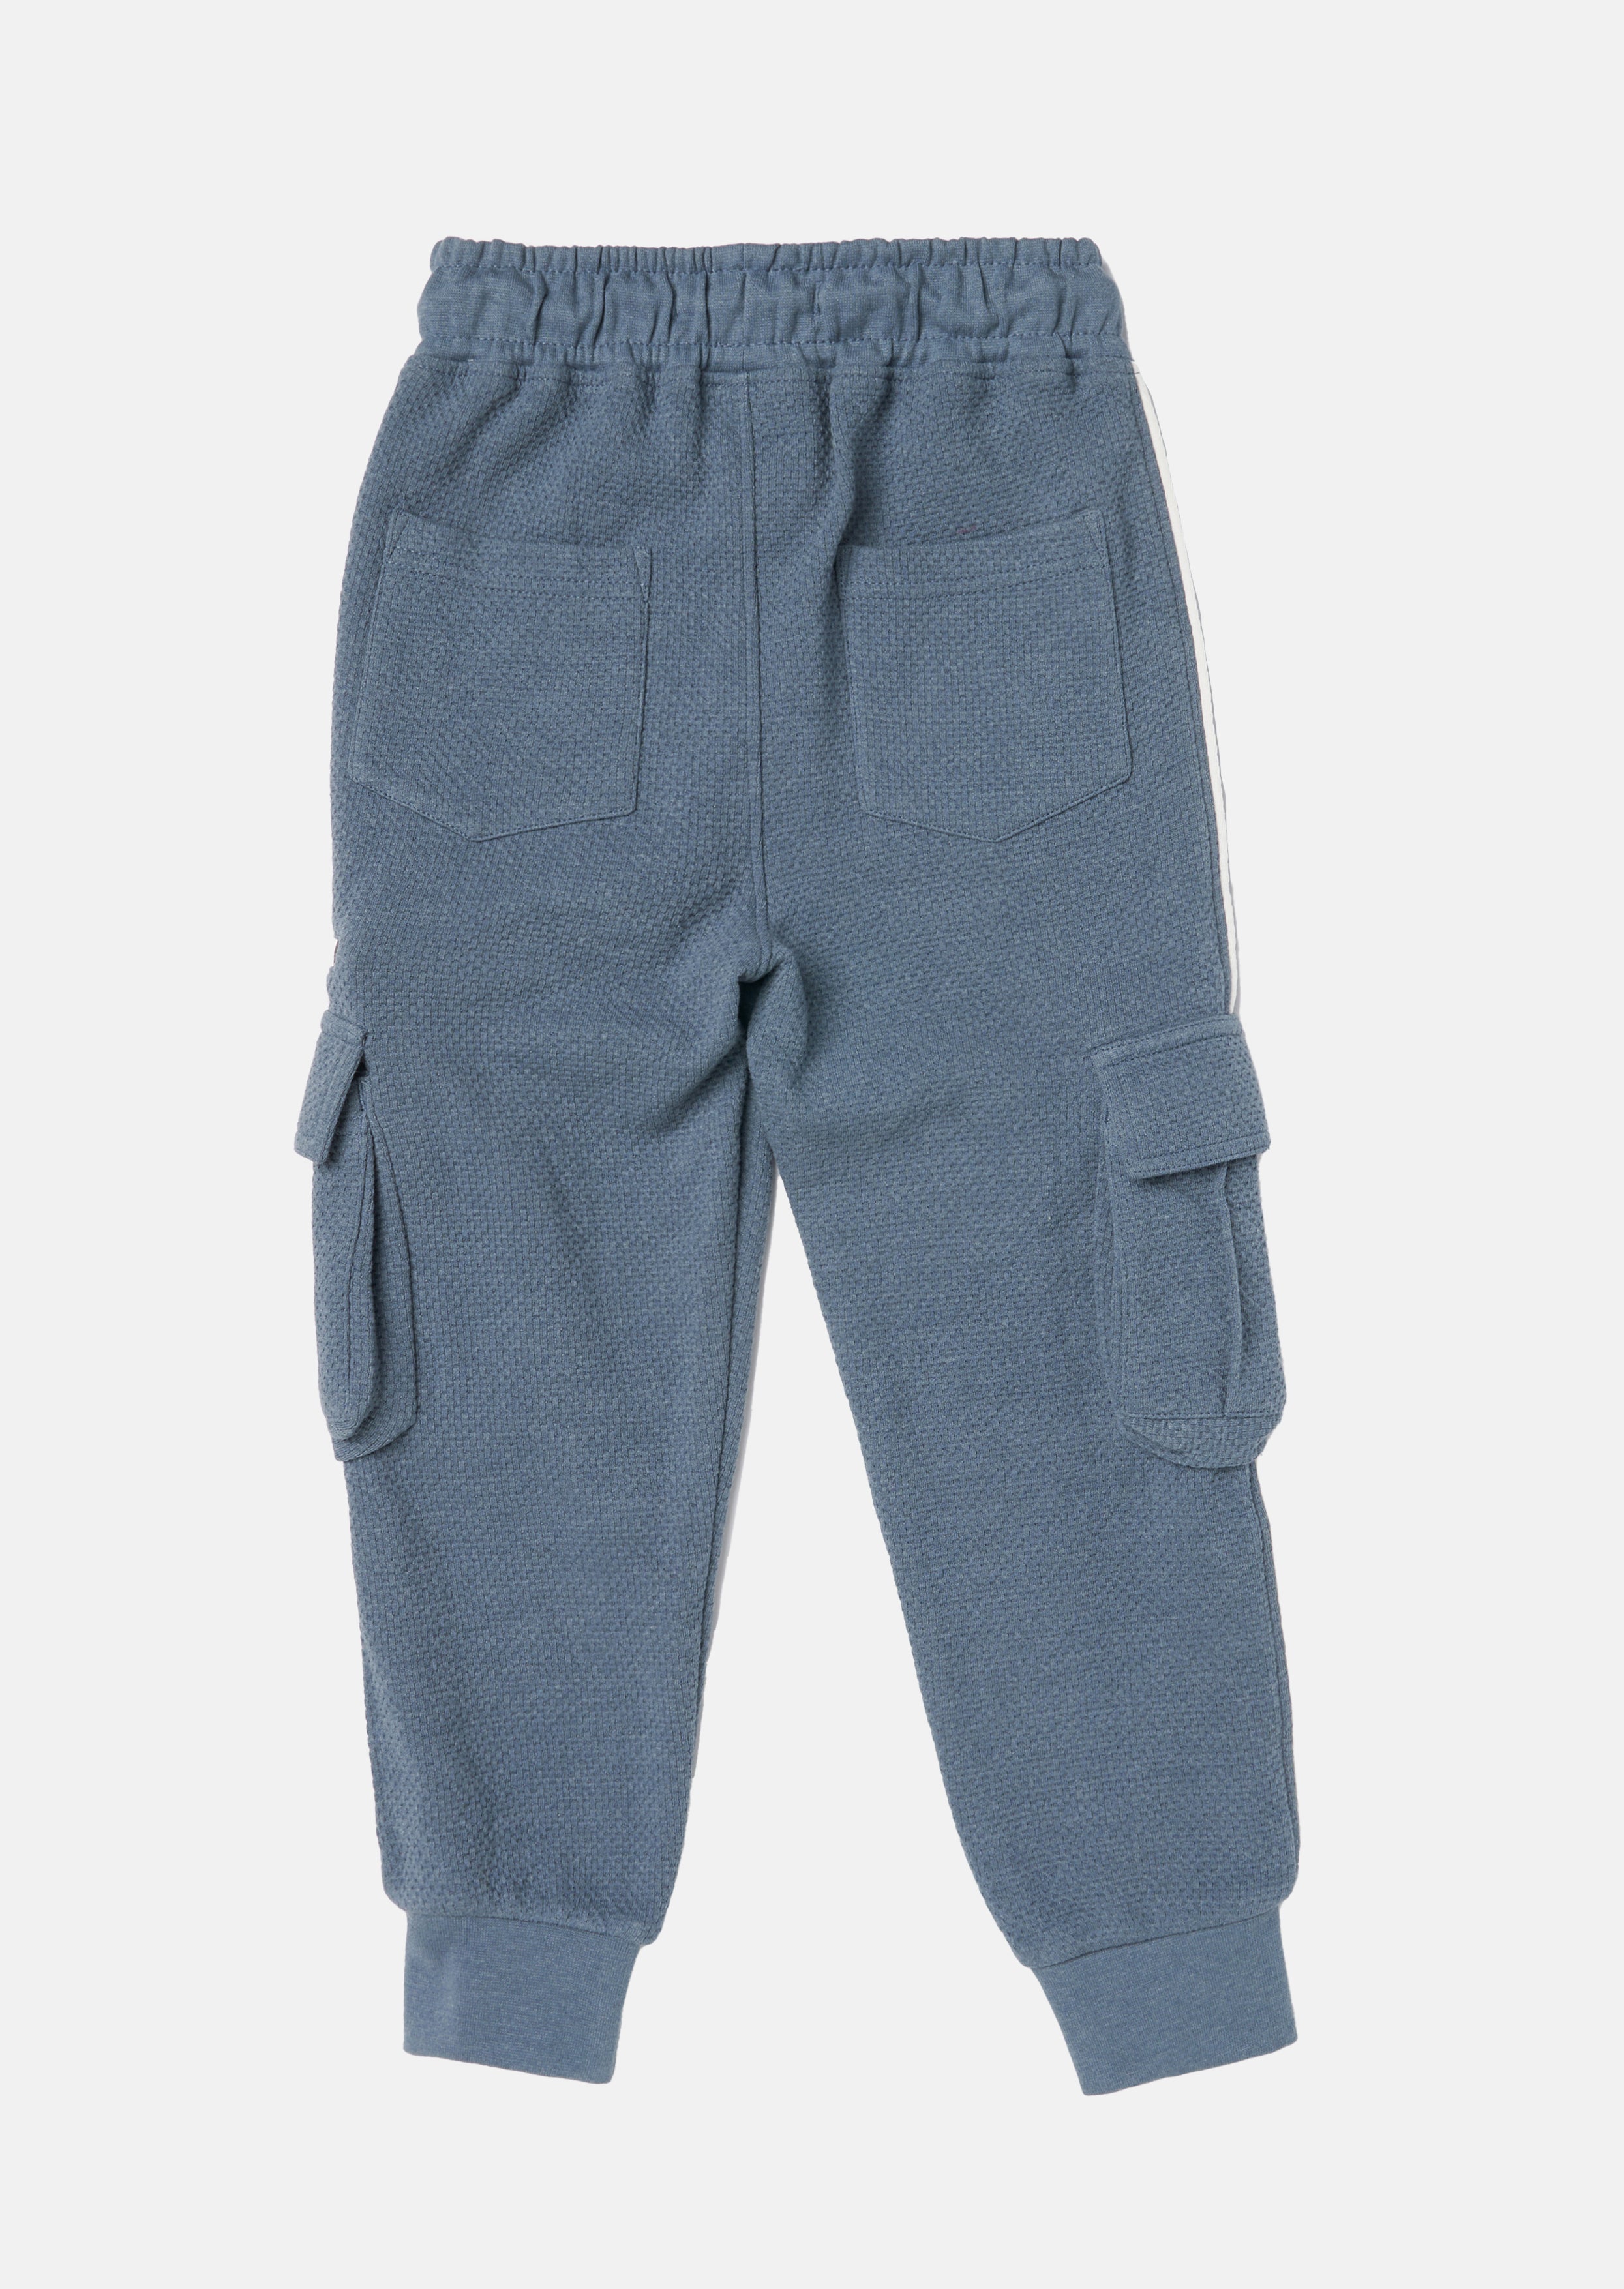 Boys Woven Solid Blue Cargo Joggers